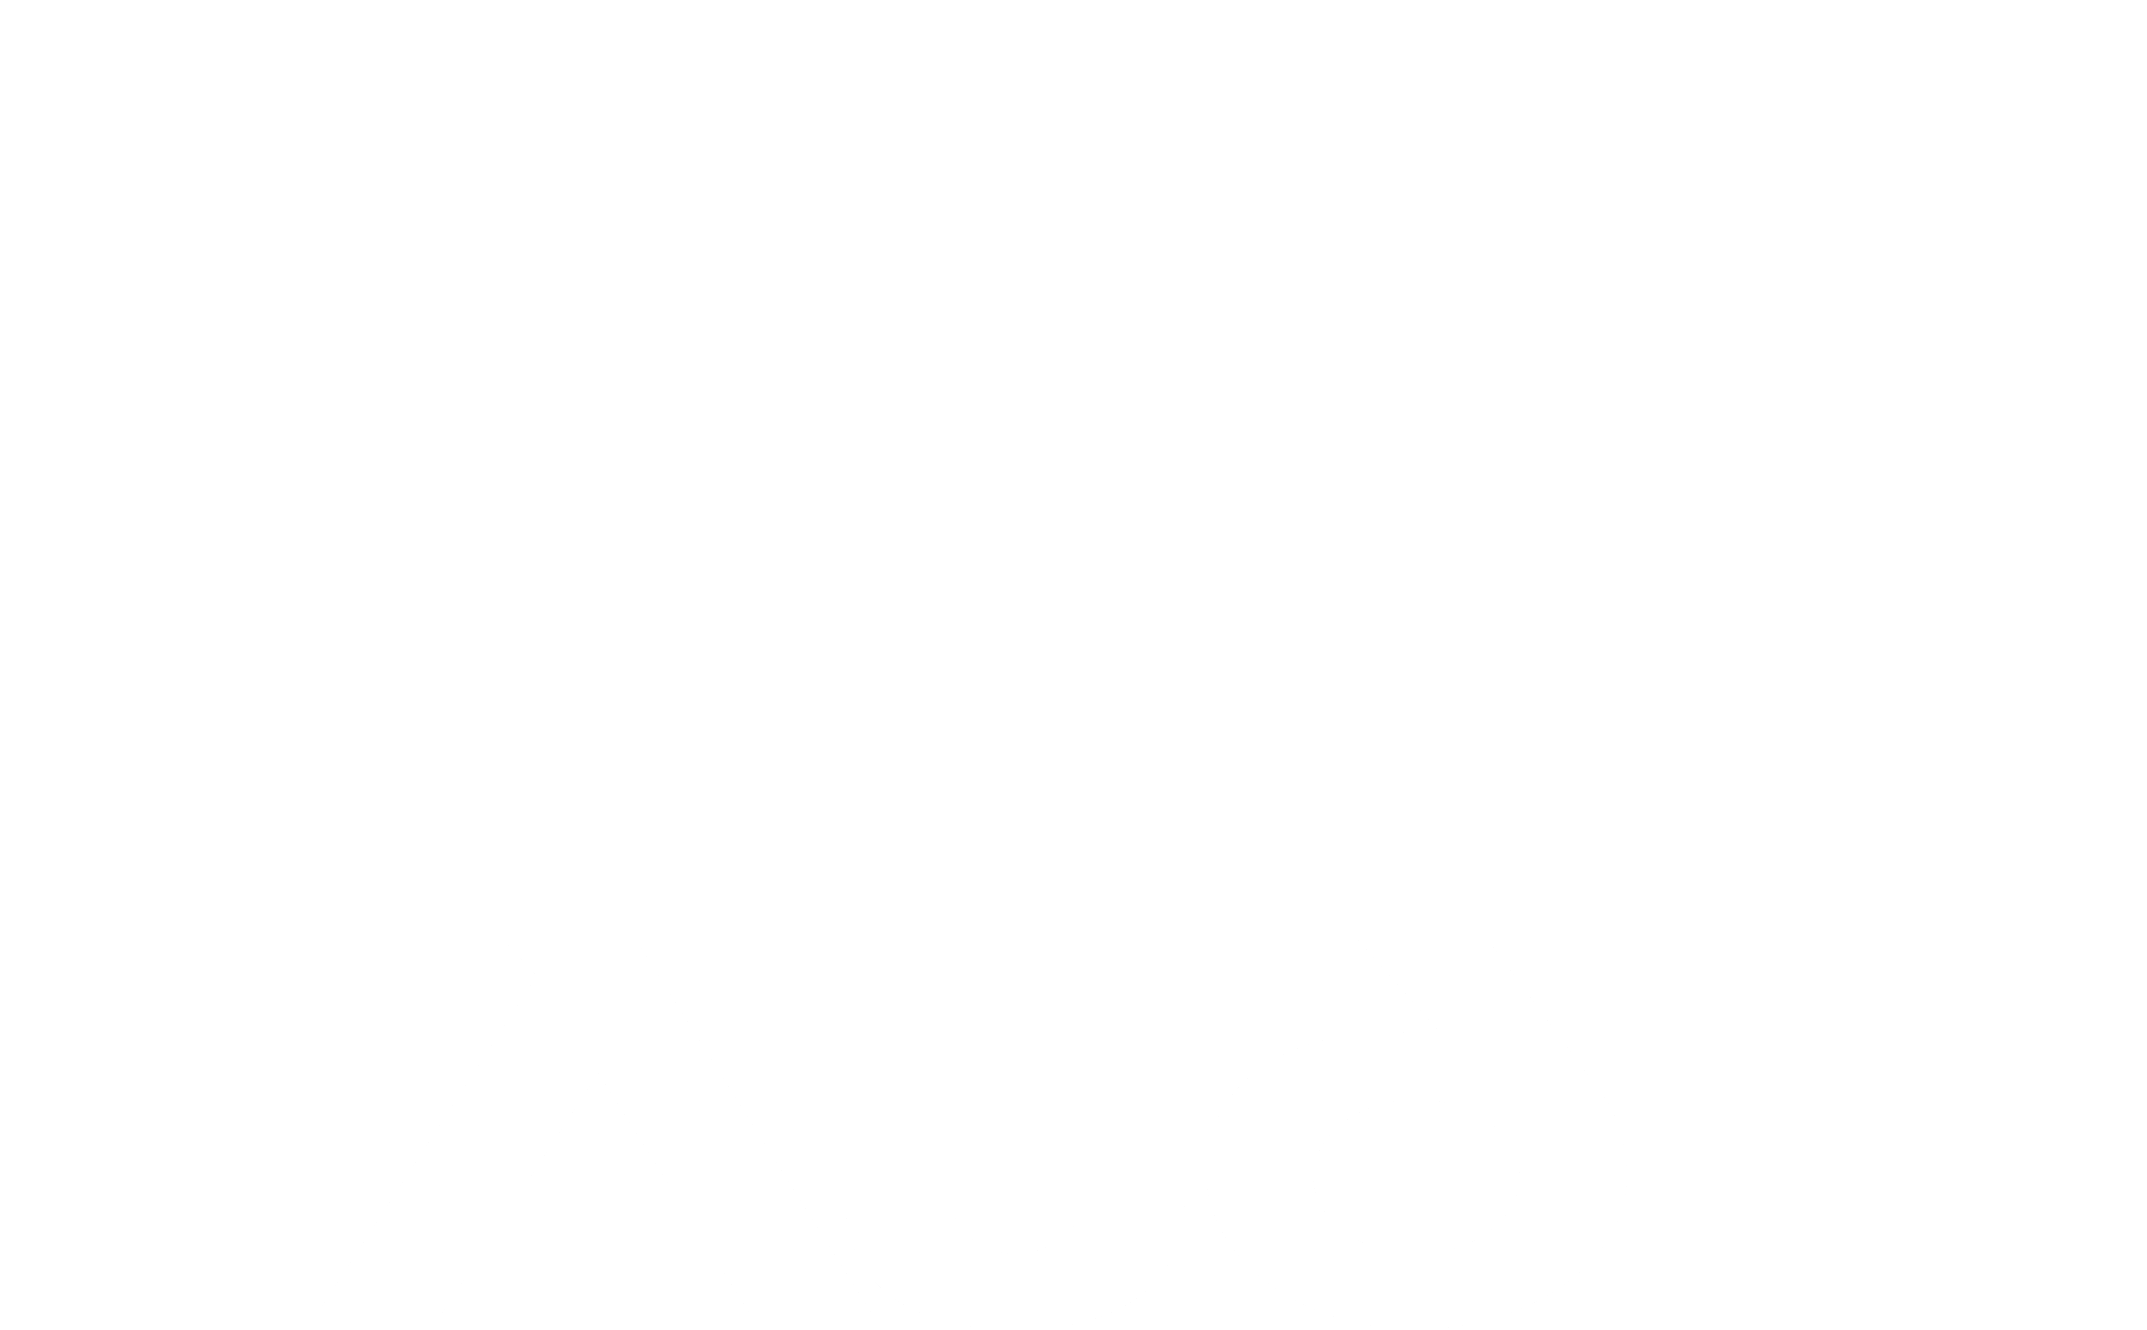 Download Audi Logo Black And White Ps4 Logo White Transparent Png Image With No Background Pngkey Com